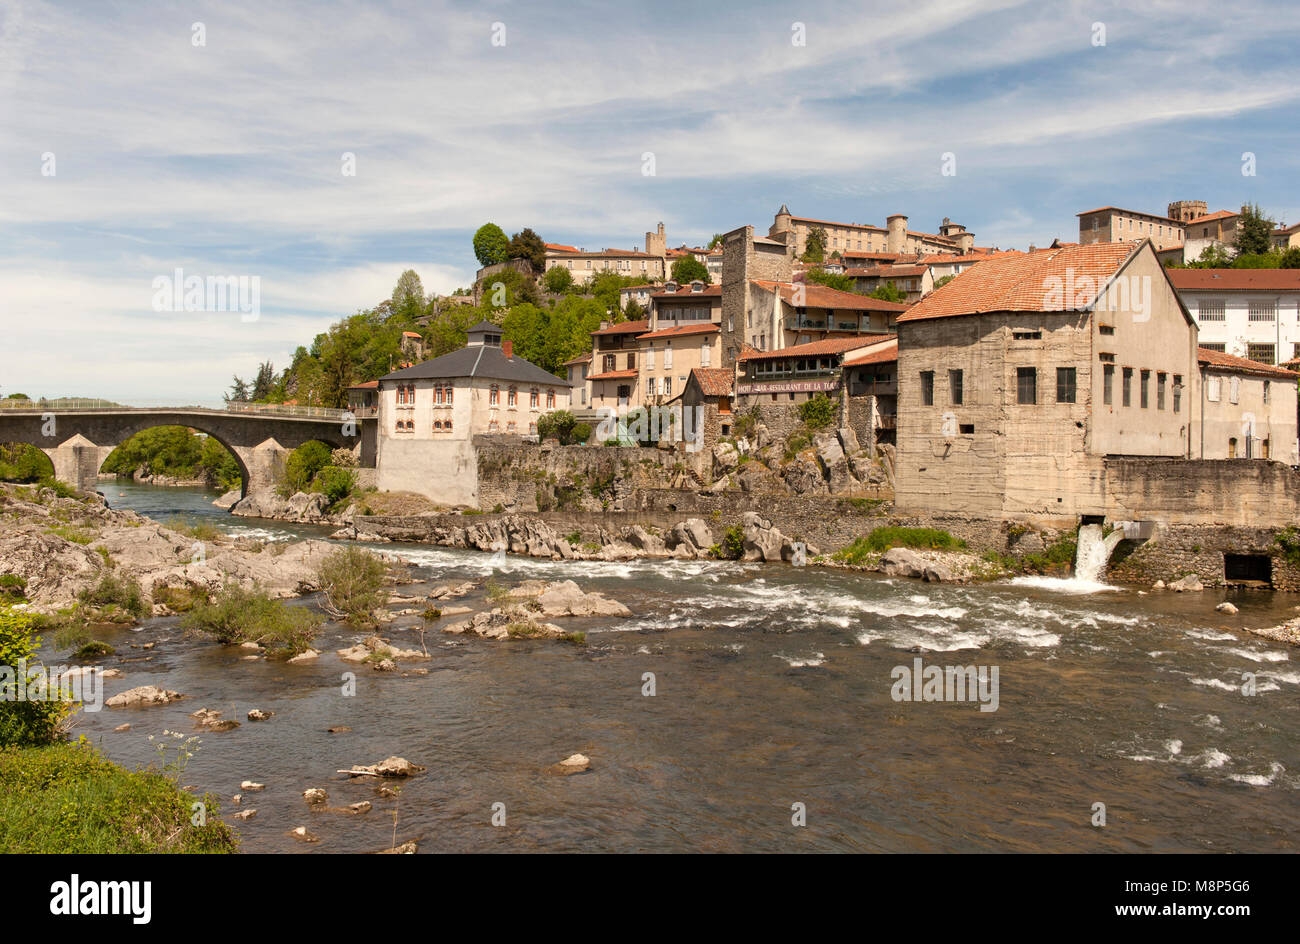 The old town of Saint-Liziers sits on the right banks of the Salat river in Ariège, Occitanie, France Stock Photo